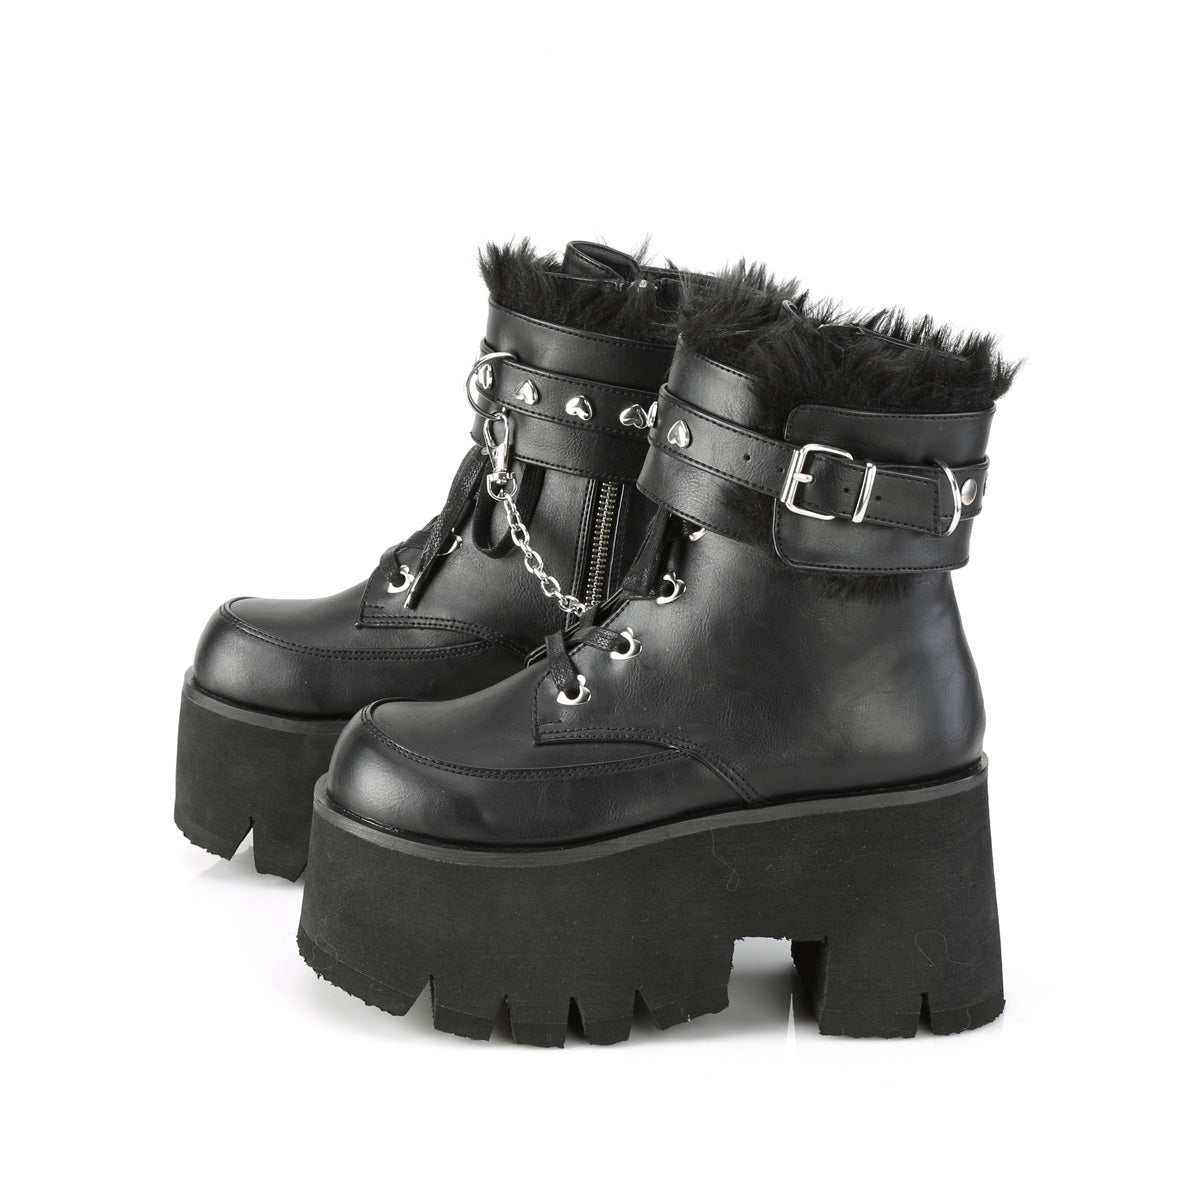 DemoniaCult Womens Ankle Boots ASHES-57 Blk Vegan Leather